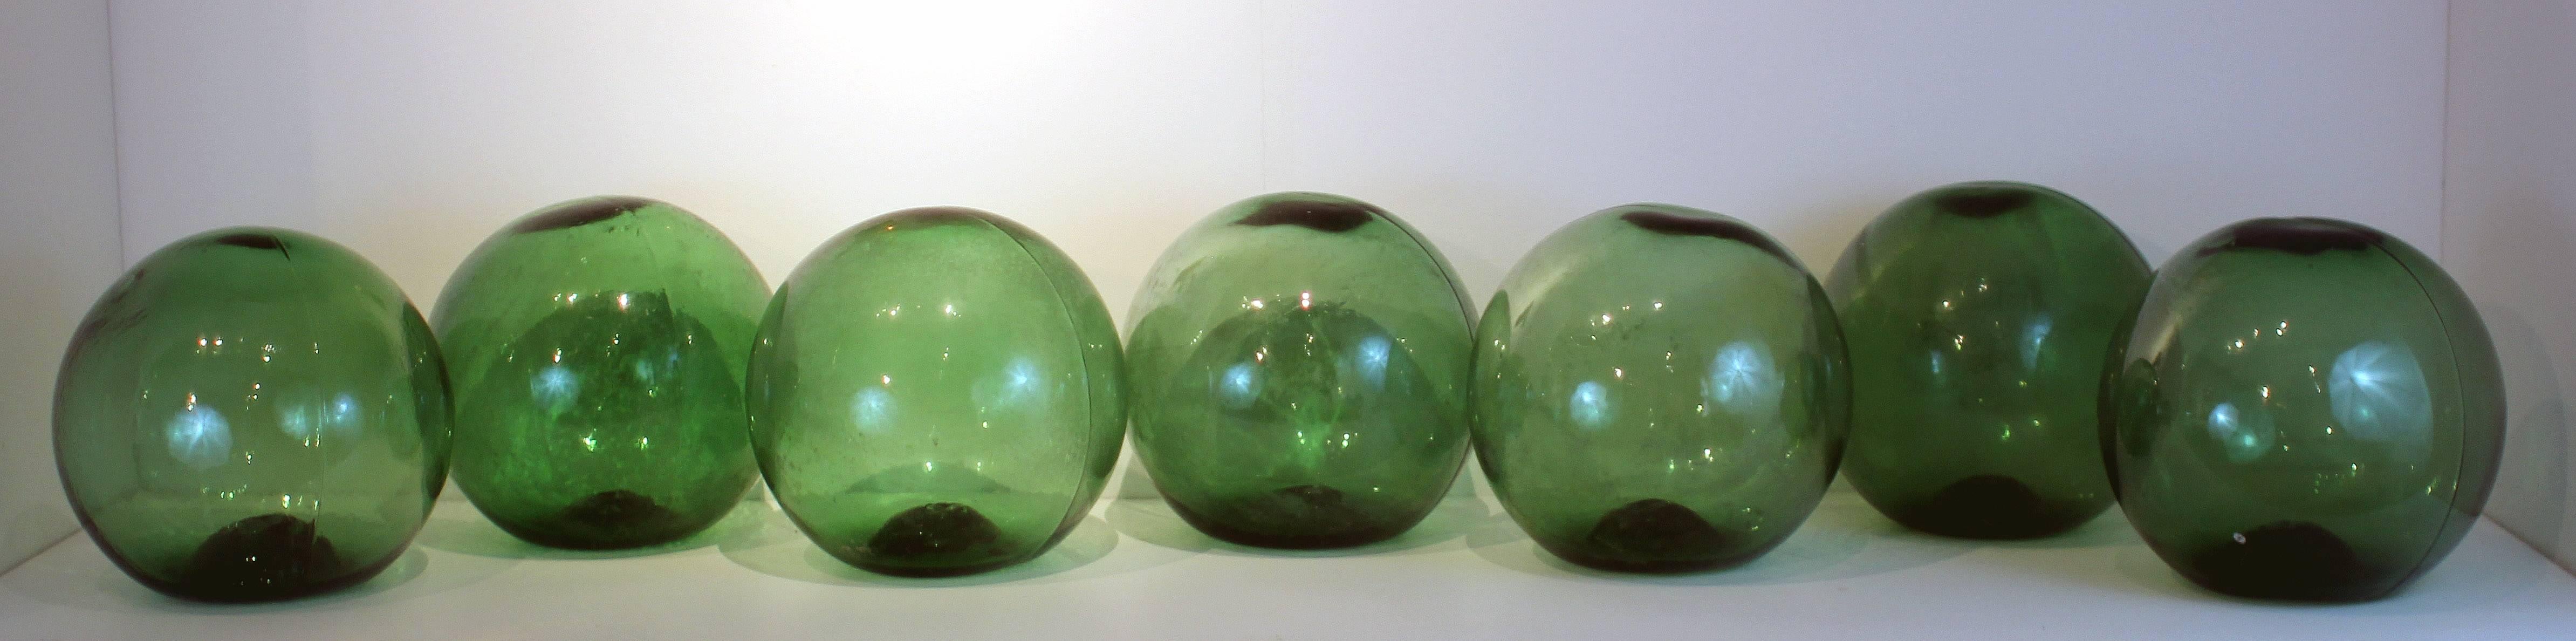 These 7 enormous glass balls were once used as floats in fishing nets in Maine. Blown and molded bright, deep green glass (all the same color). They each measure about 12" in diameter and sit flat. Sold only as a group.